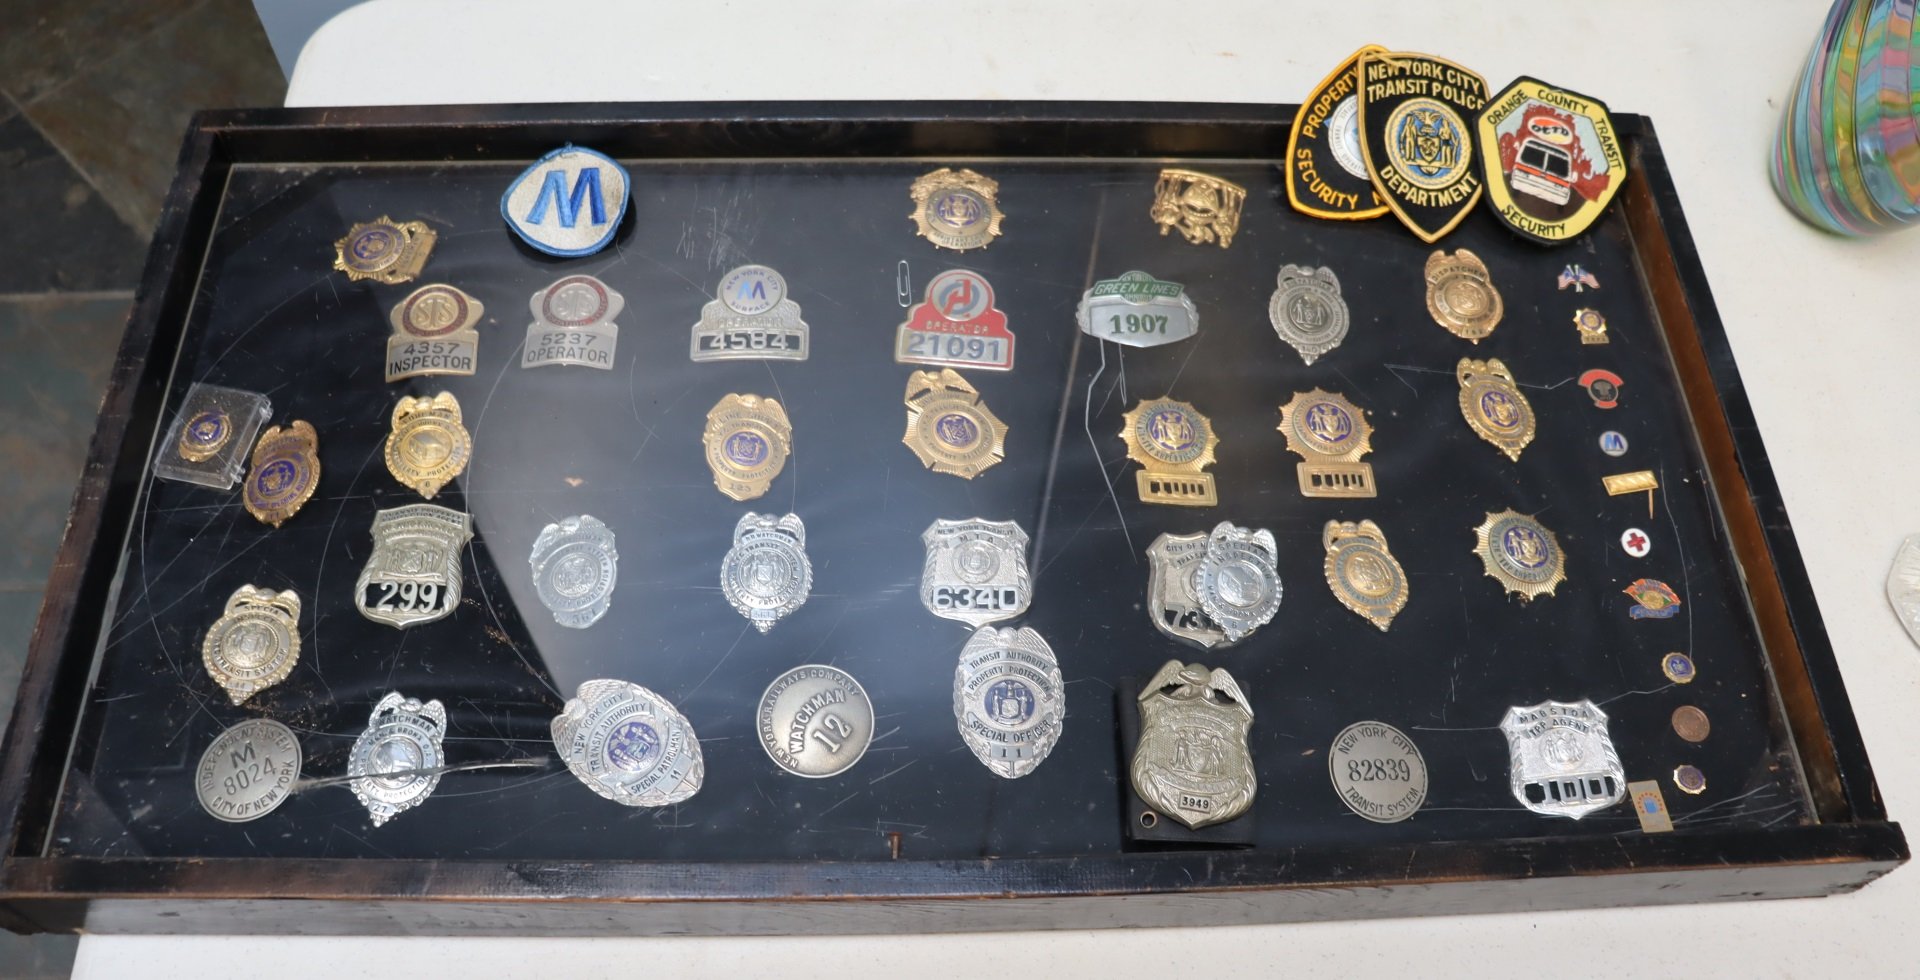 VINTAGE COLLECTIBLE BADGES / MEDALS